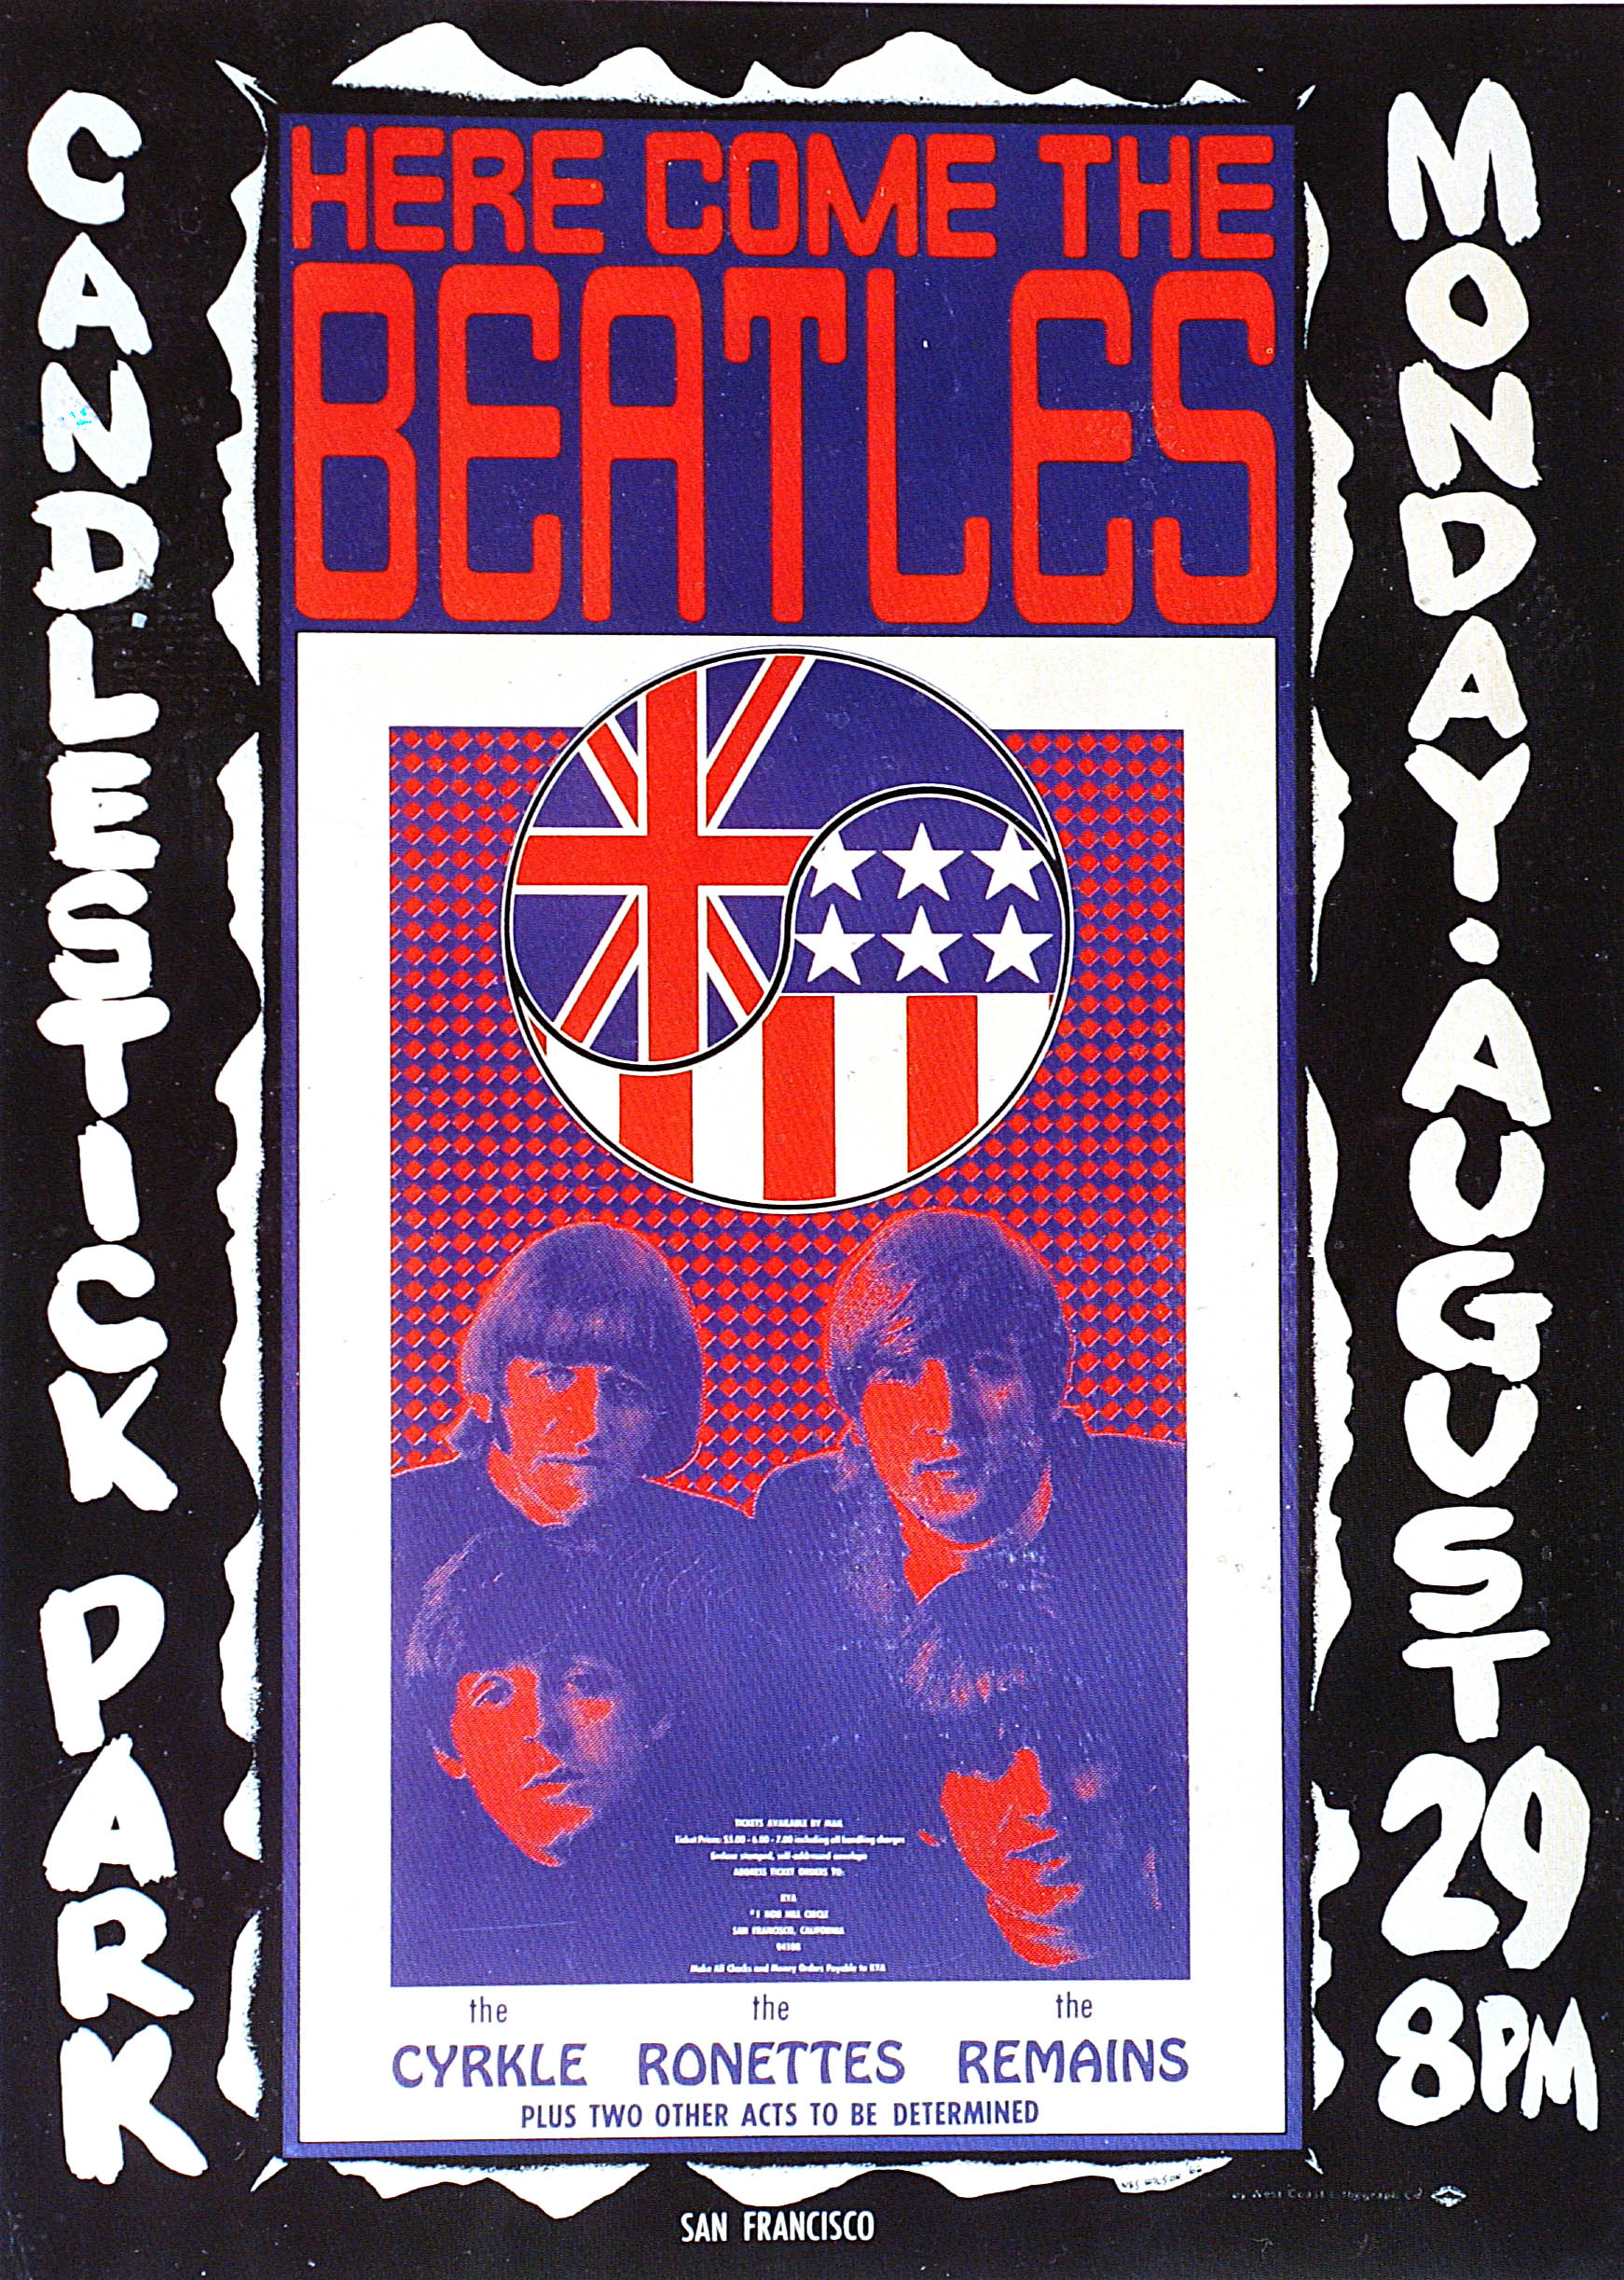 Photo Of Memorabilia BEATLES And CONCERT POSTERS And BEATLES